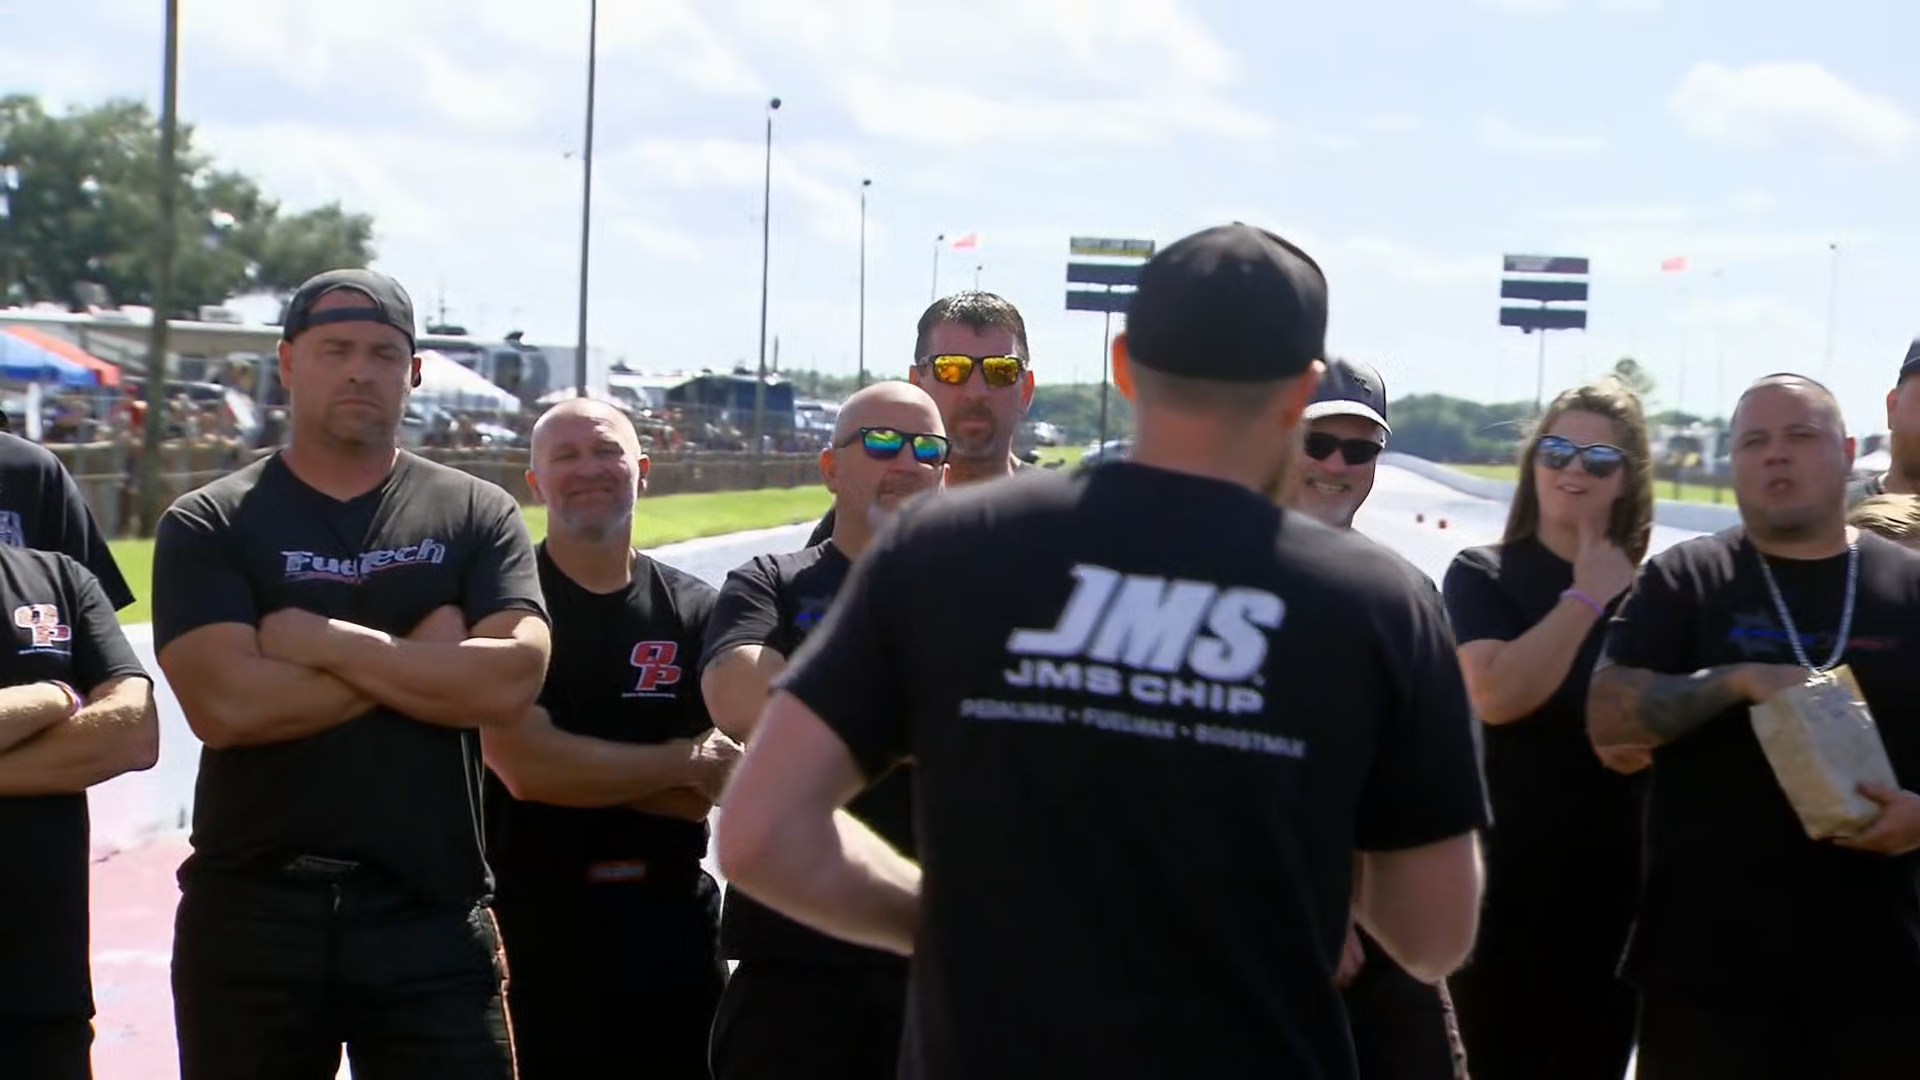 Chelsea day street outlaws pics